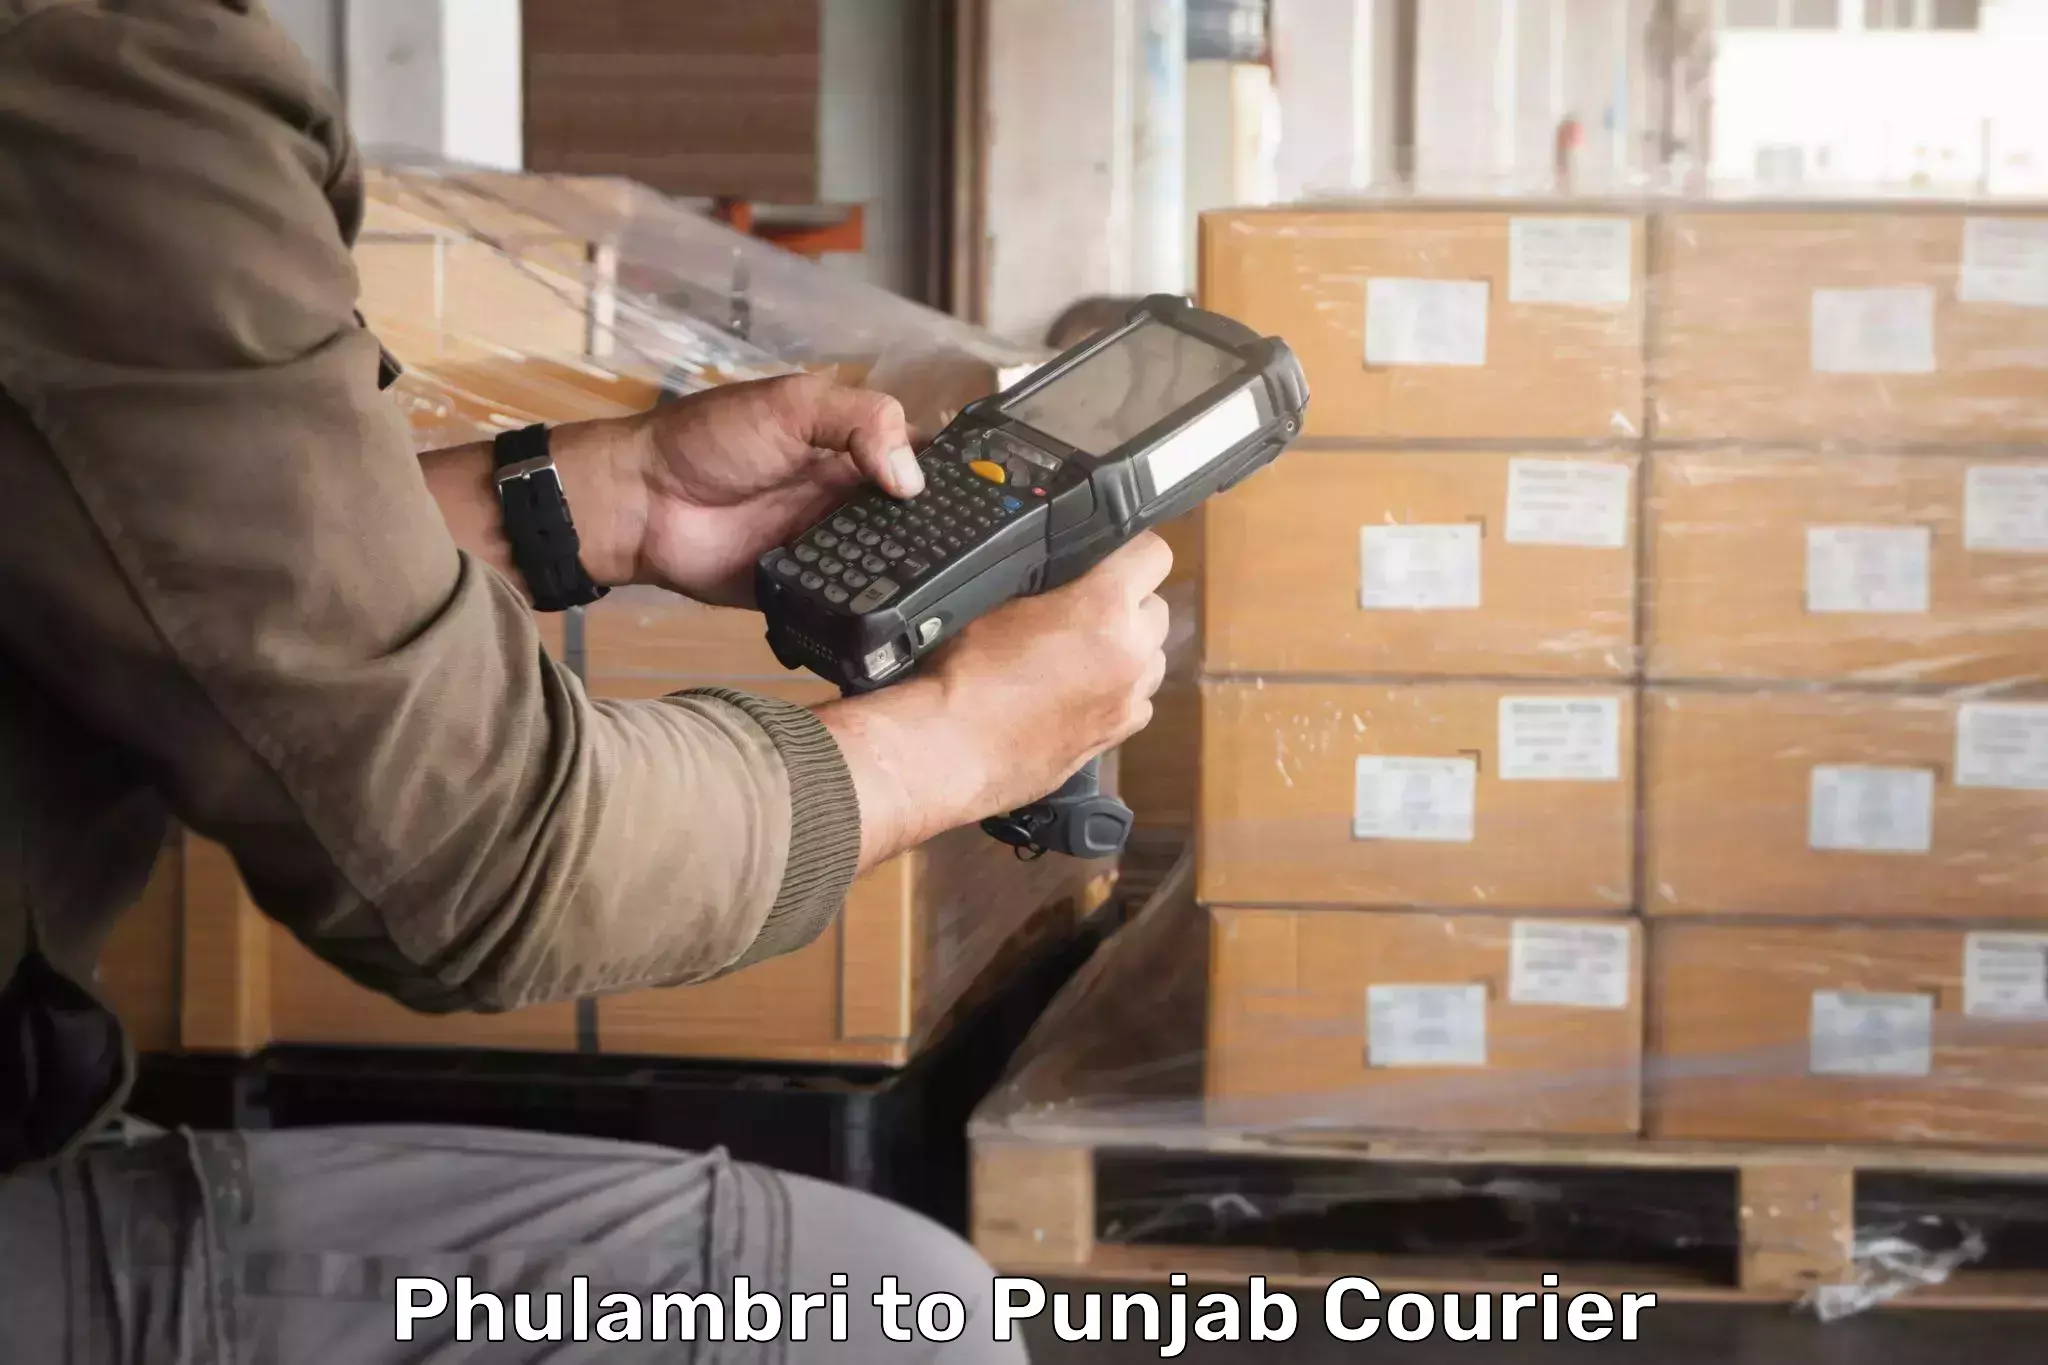 State-of-the-art courier technology Phulambri to Faridkot